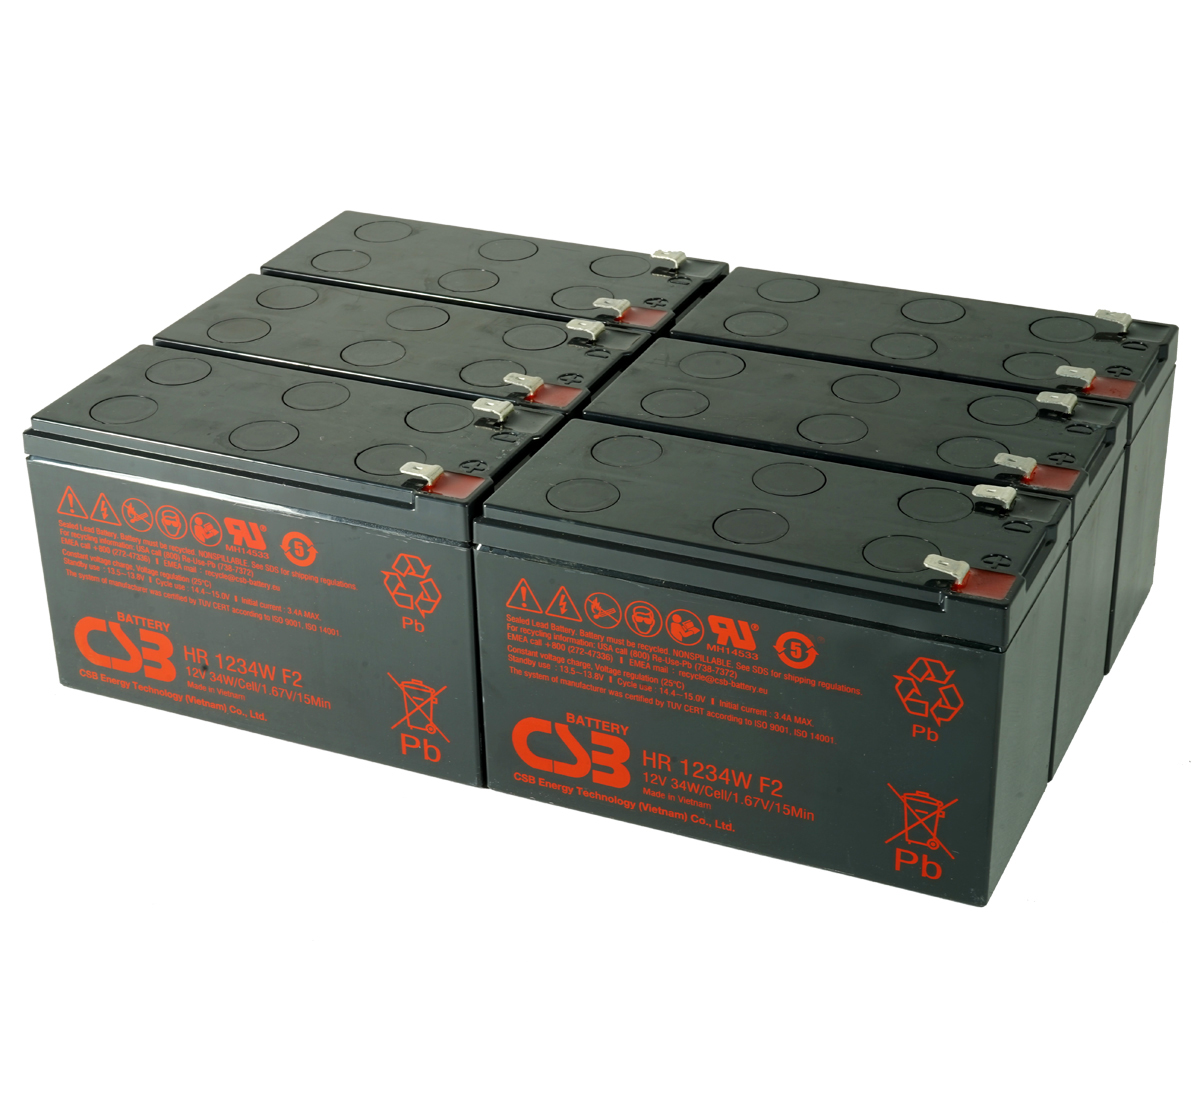 MDS2409 UPS Battery Kit for MGE AB2409